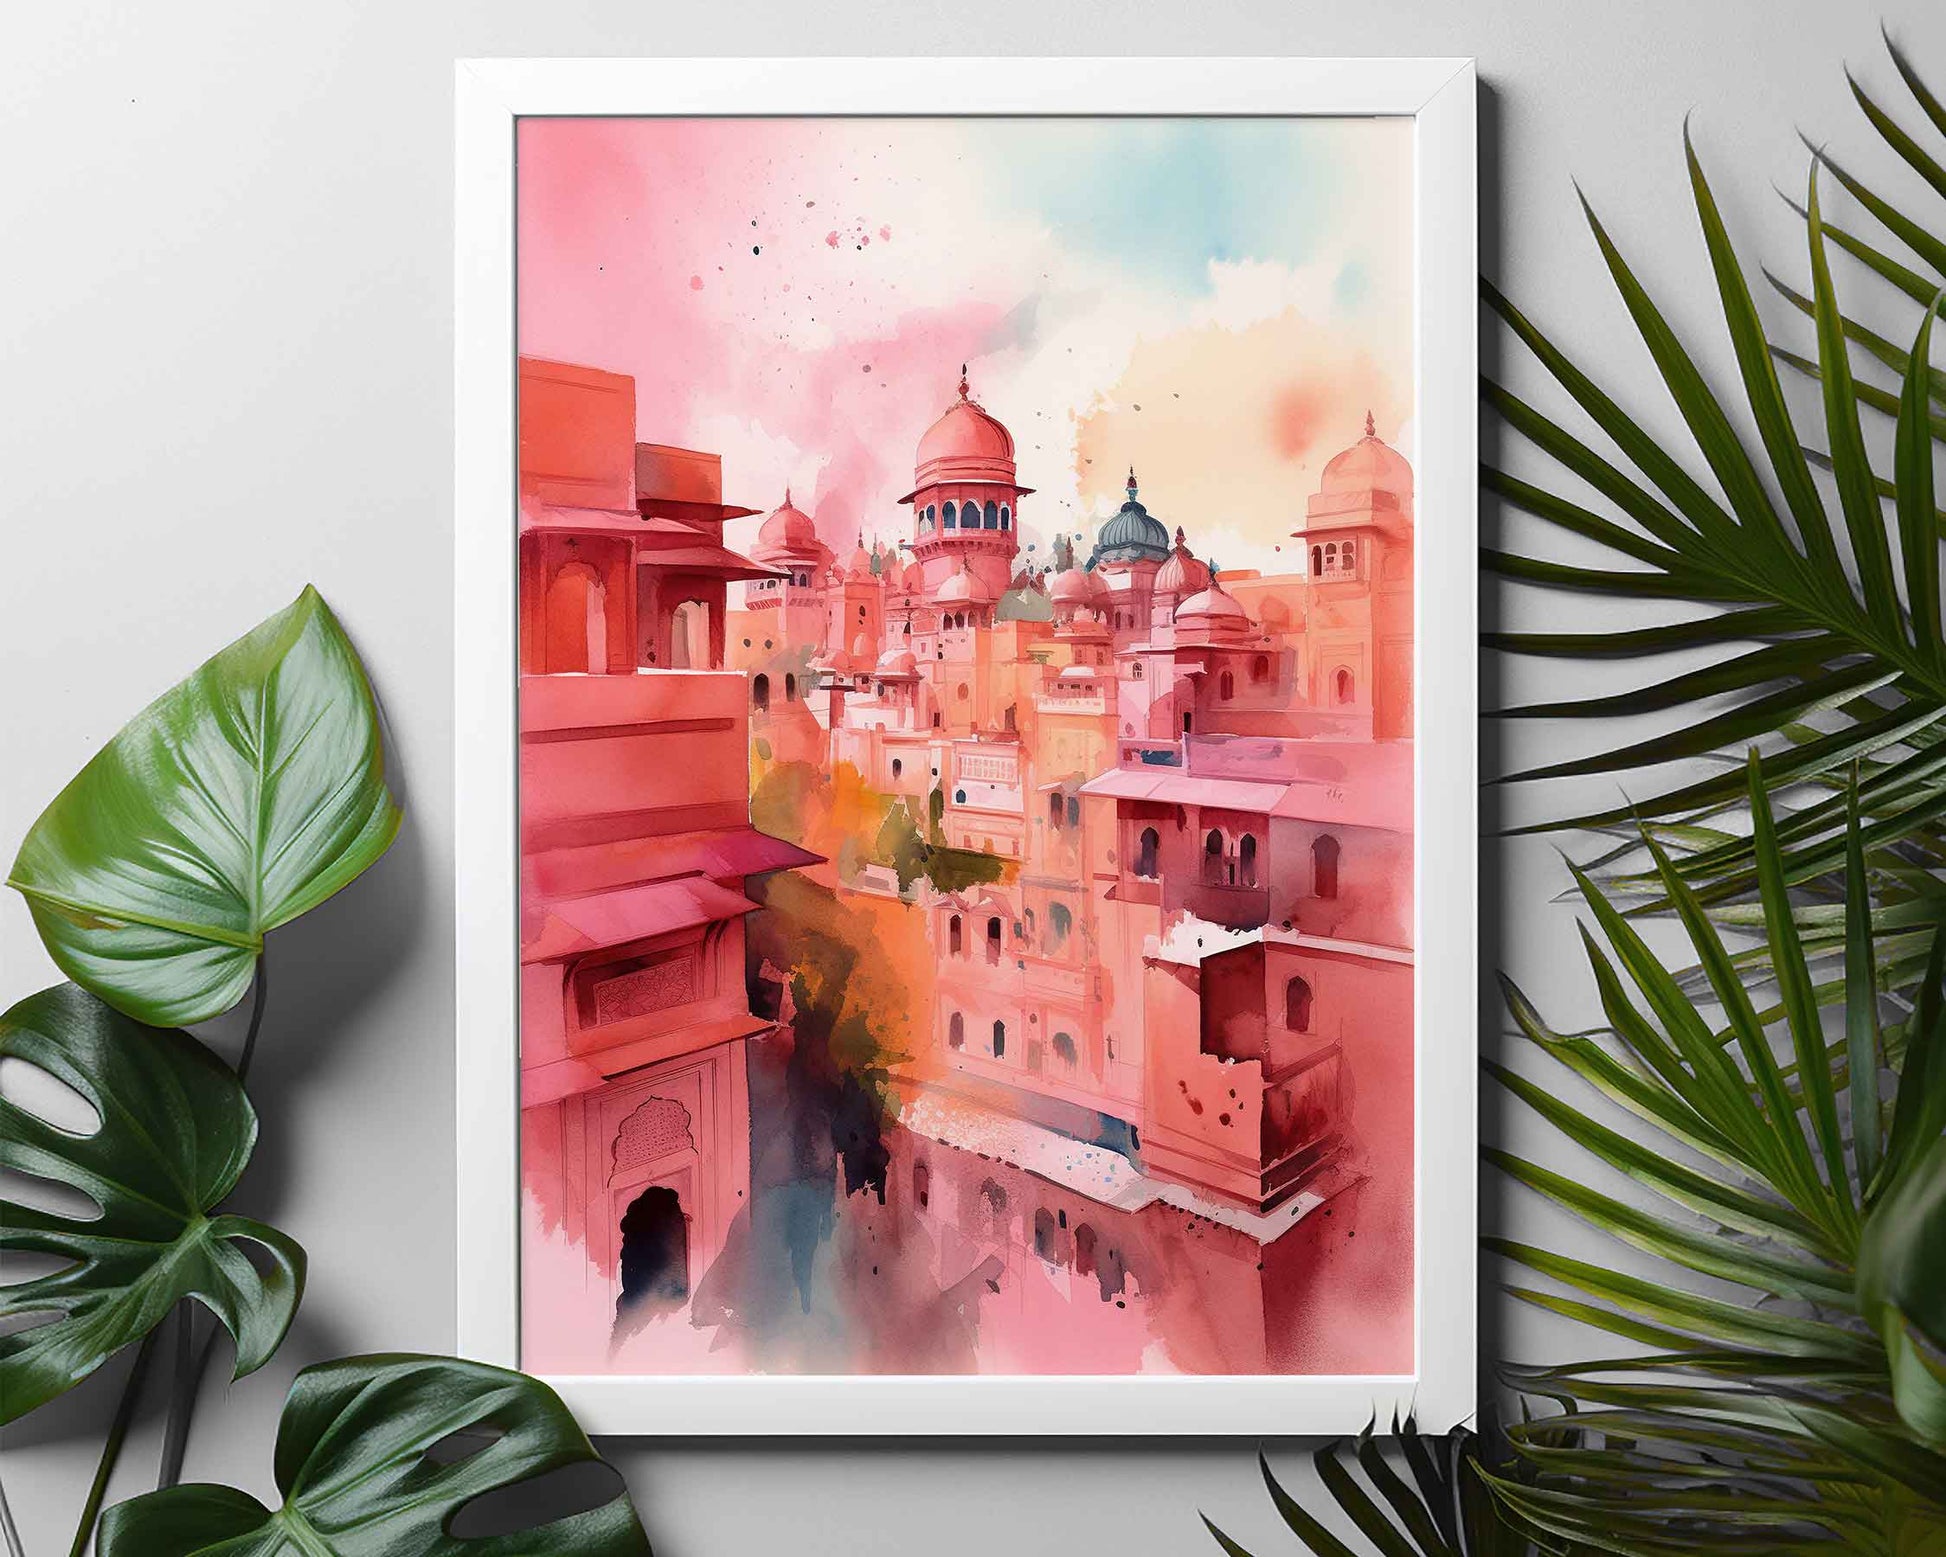 Framed Image of Jaipur Colourful Watercolour Pink Buildings Wall Art Prints